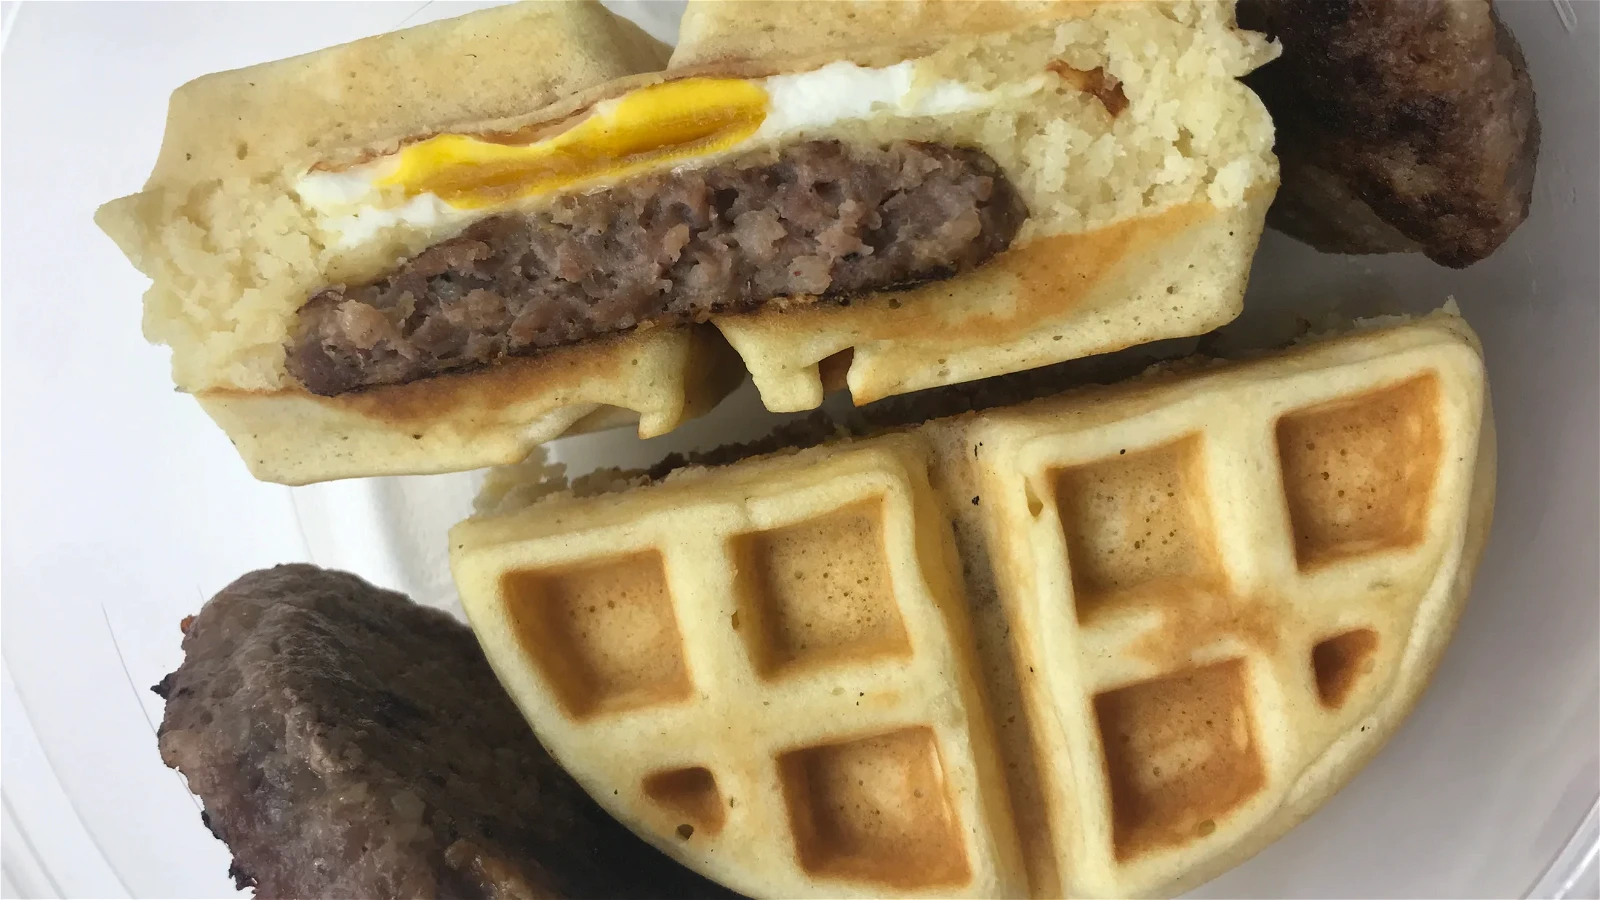 Image of Sausage, Egg, and Cheese Stuffed Waffle